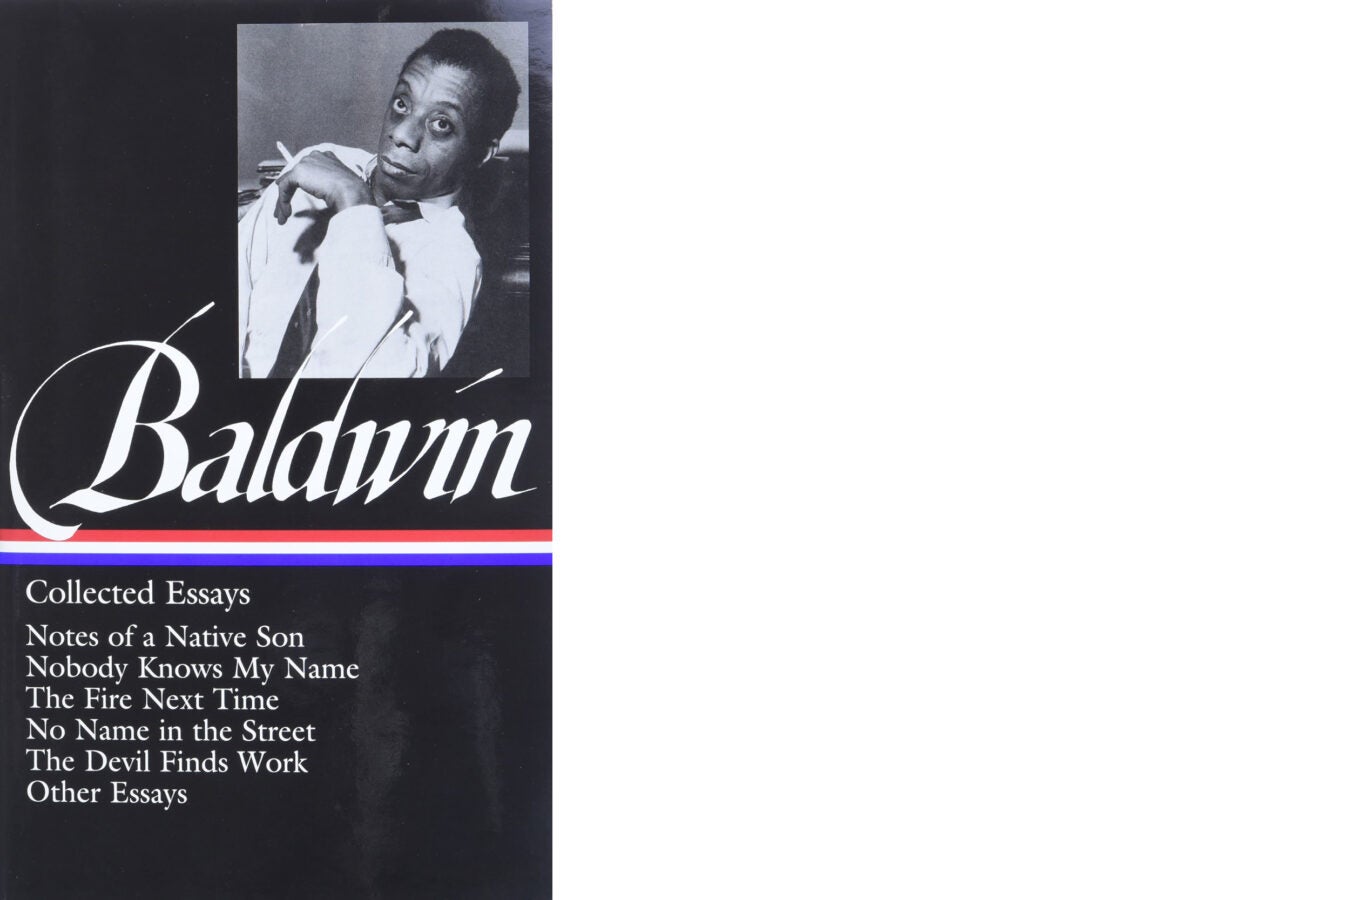 Book cover: “Collected Essays” by James Baldwin, edited by Toni Morrison.